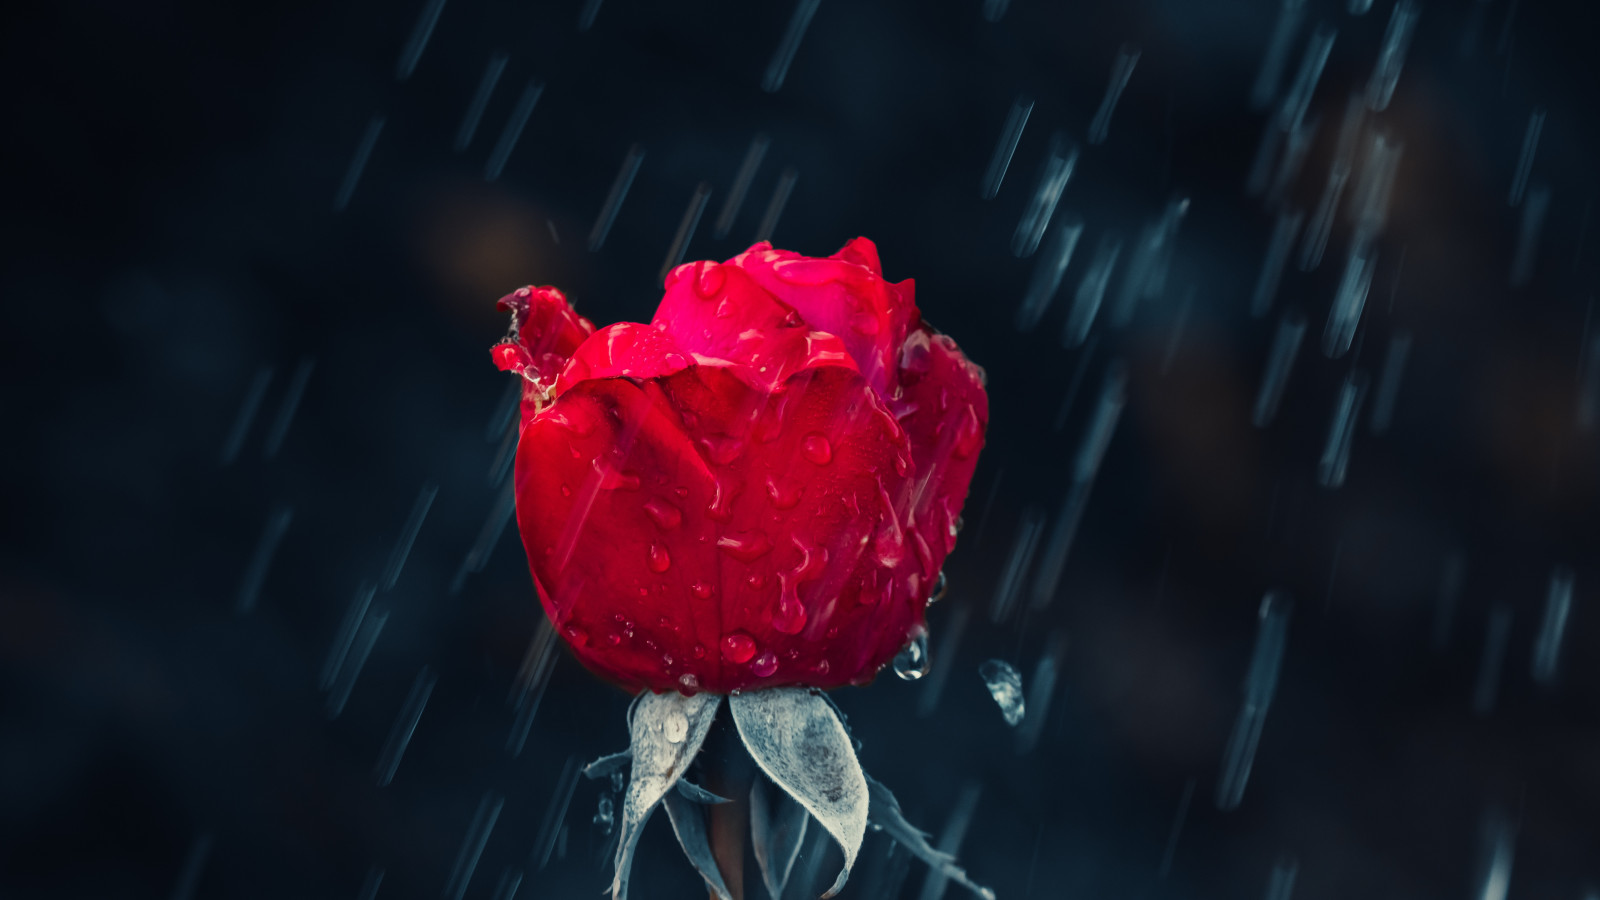 Red rose and raindrops wallpaper 1600x900